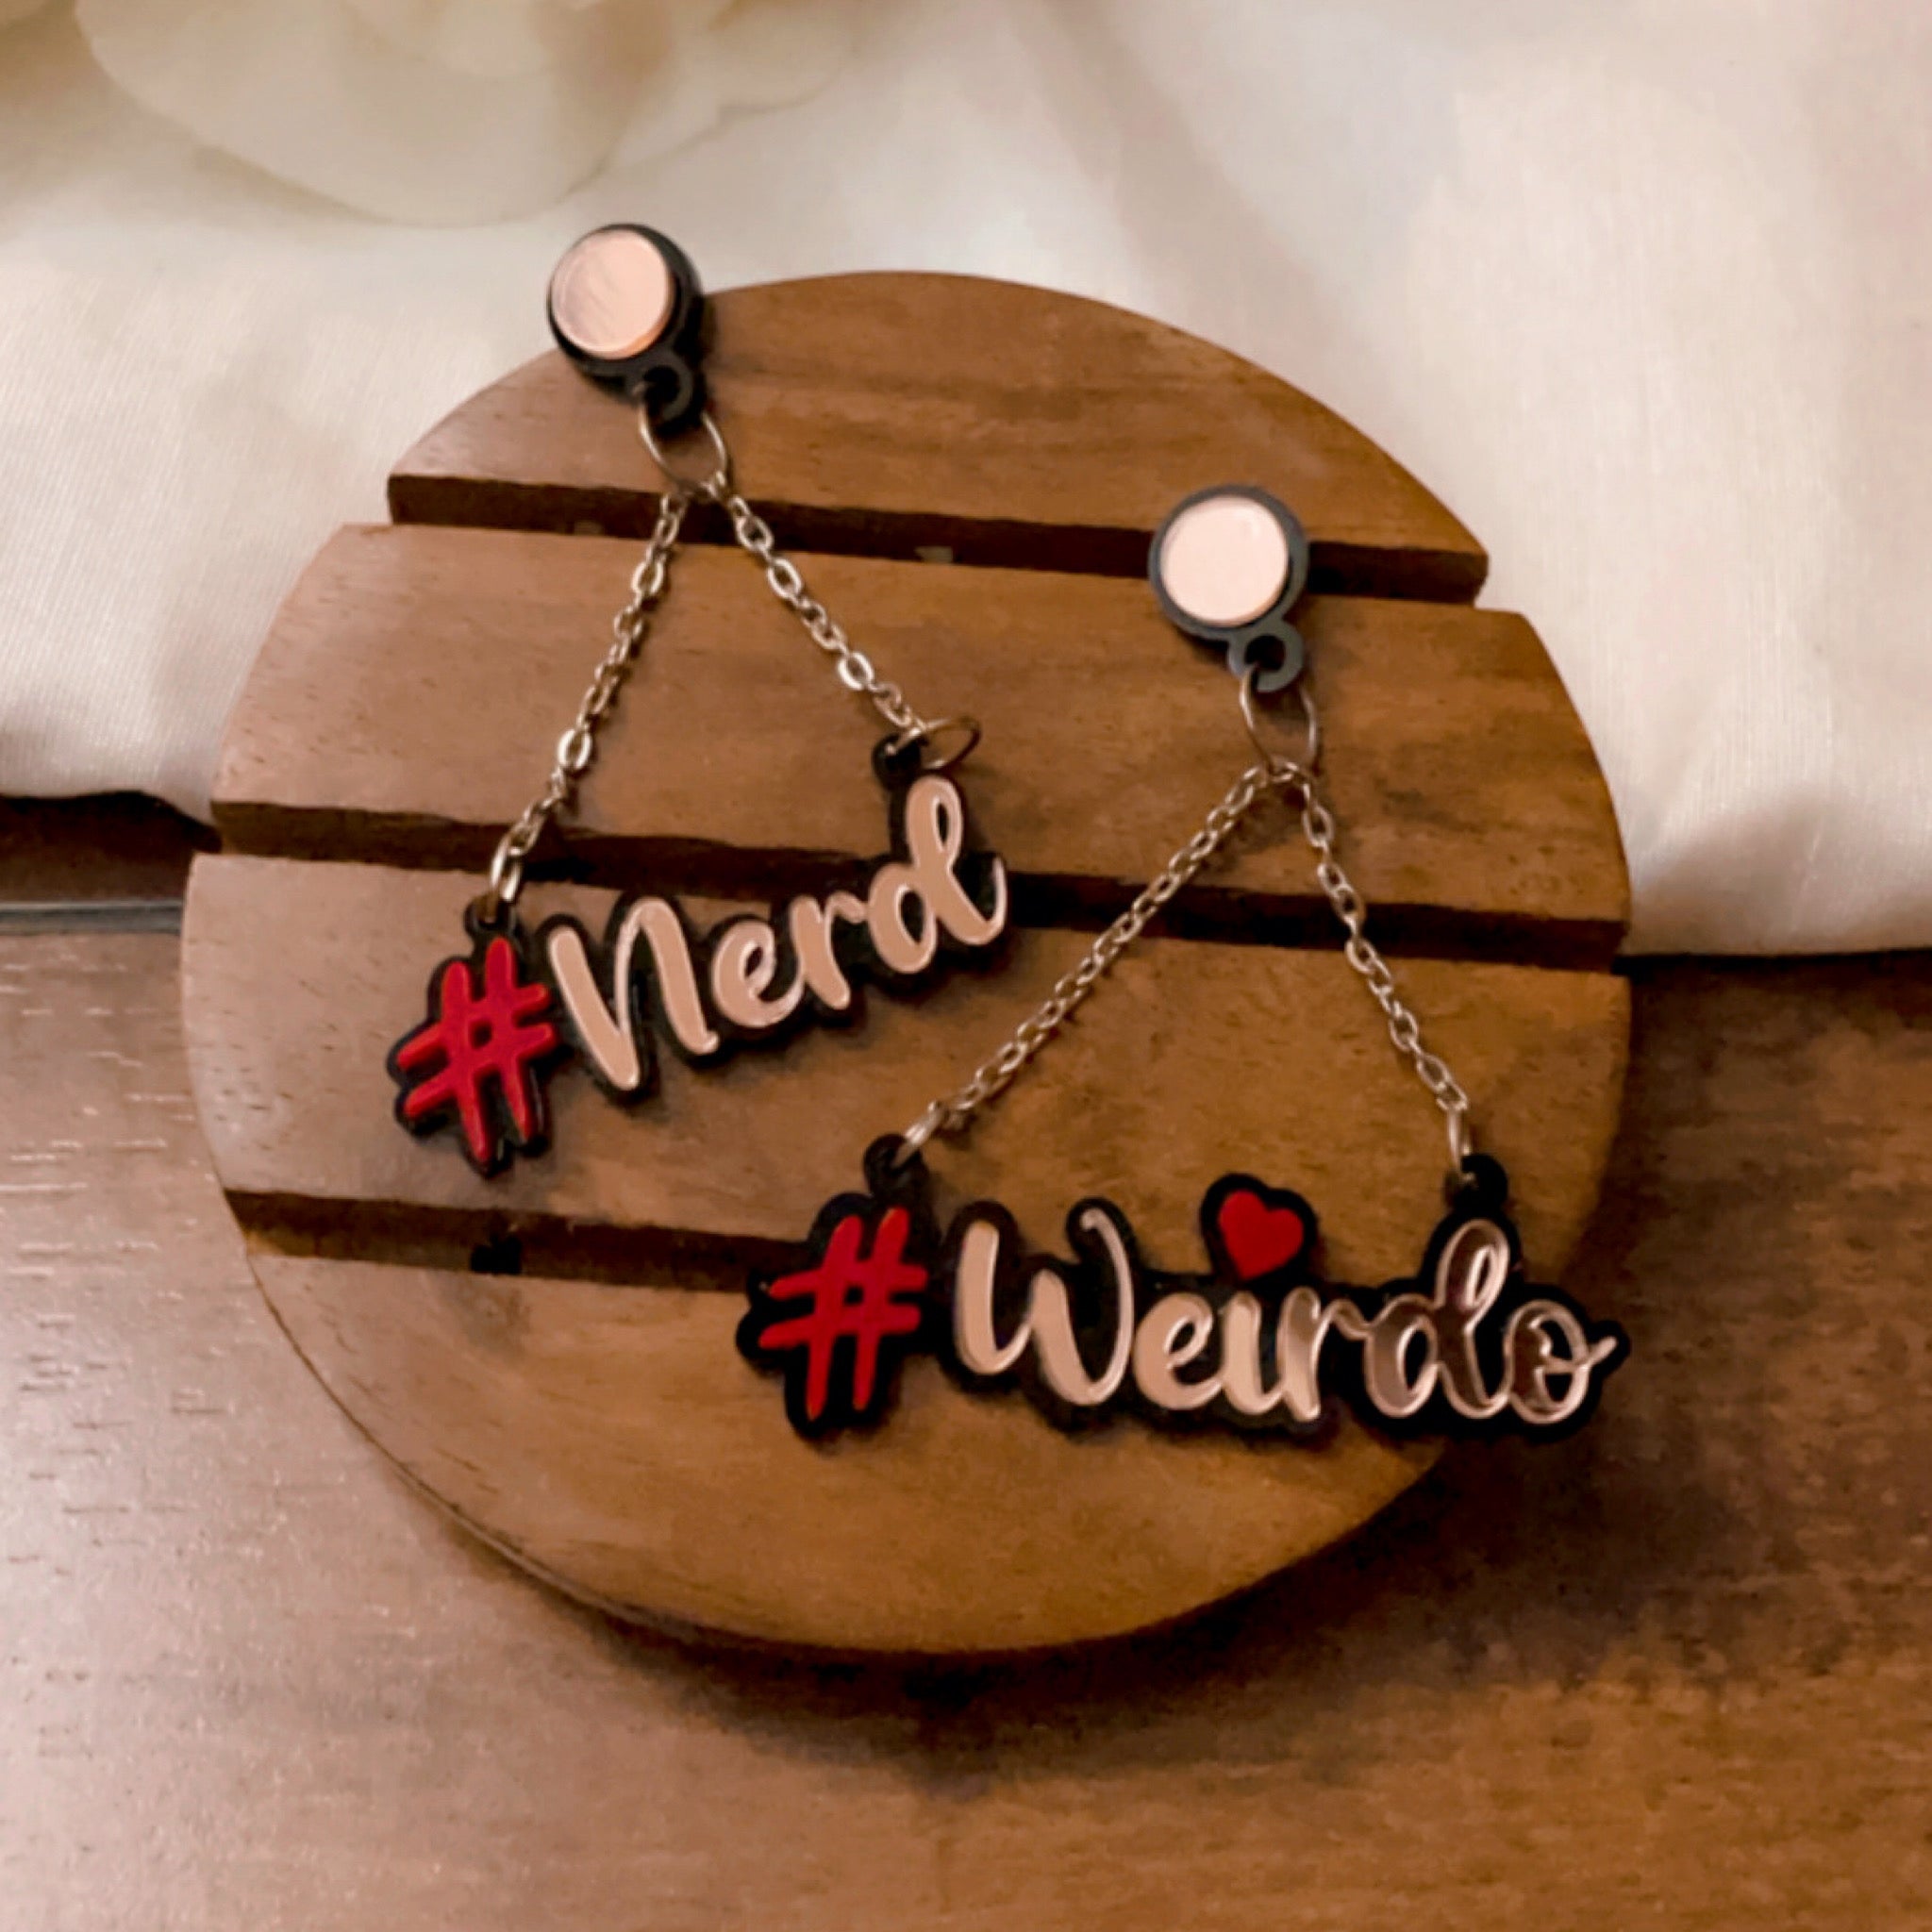 Customised Alphabet Earrings - personalised with a text - #Nerd and #Weirdo - red and rose gold - Nian by Nidhi - in a white and brown background